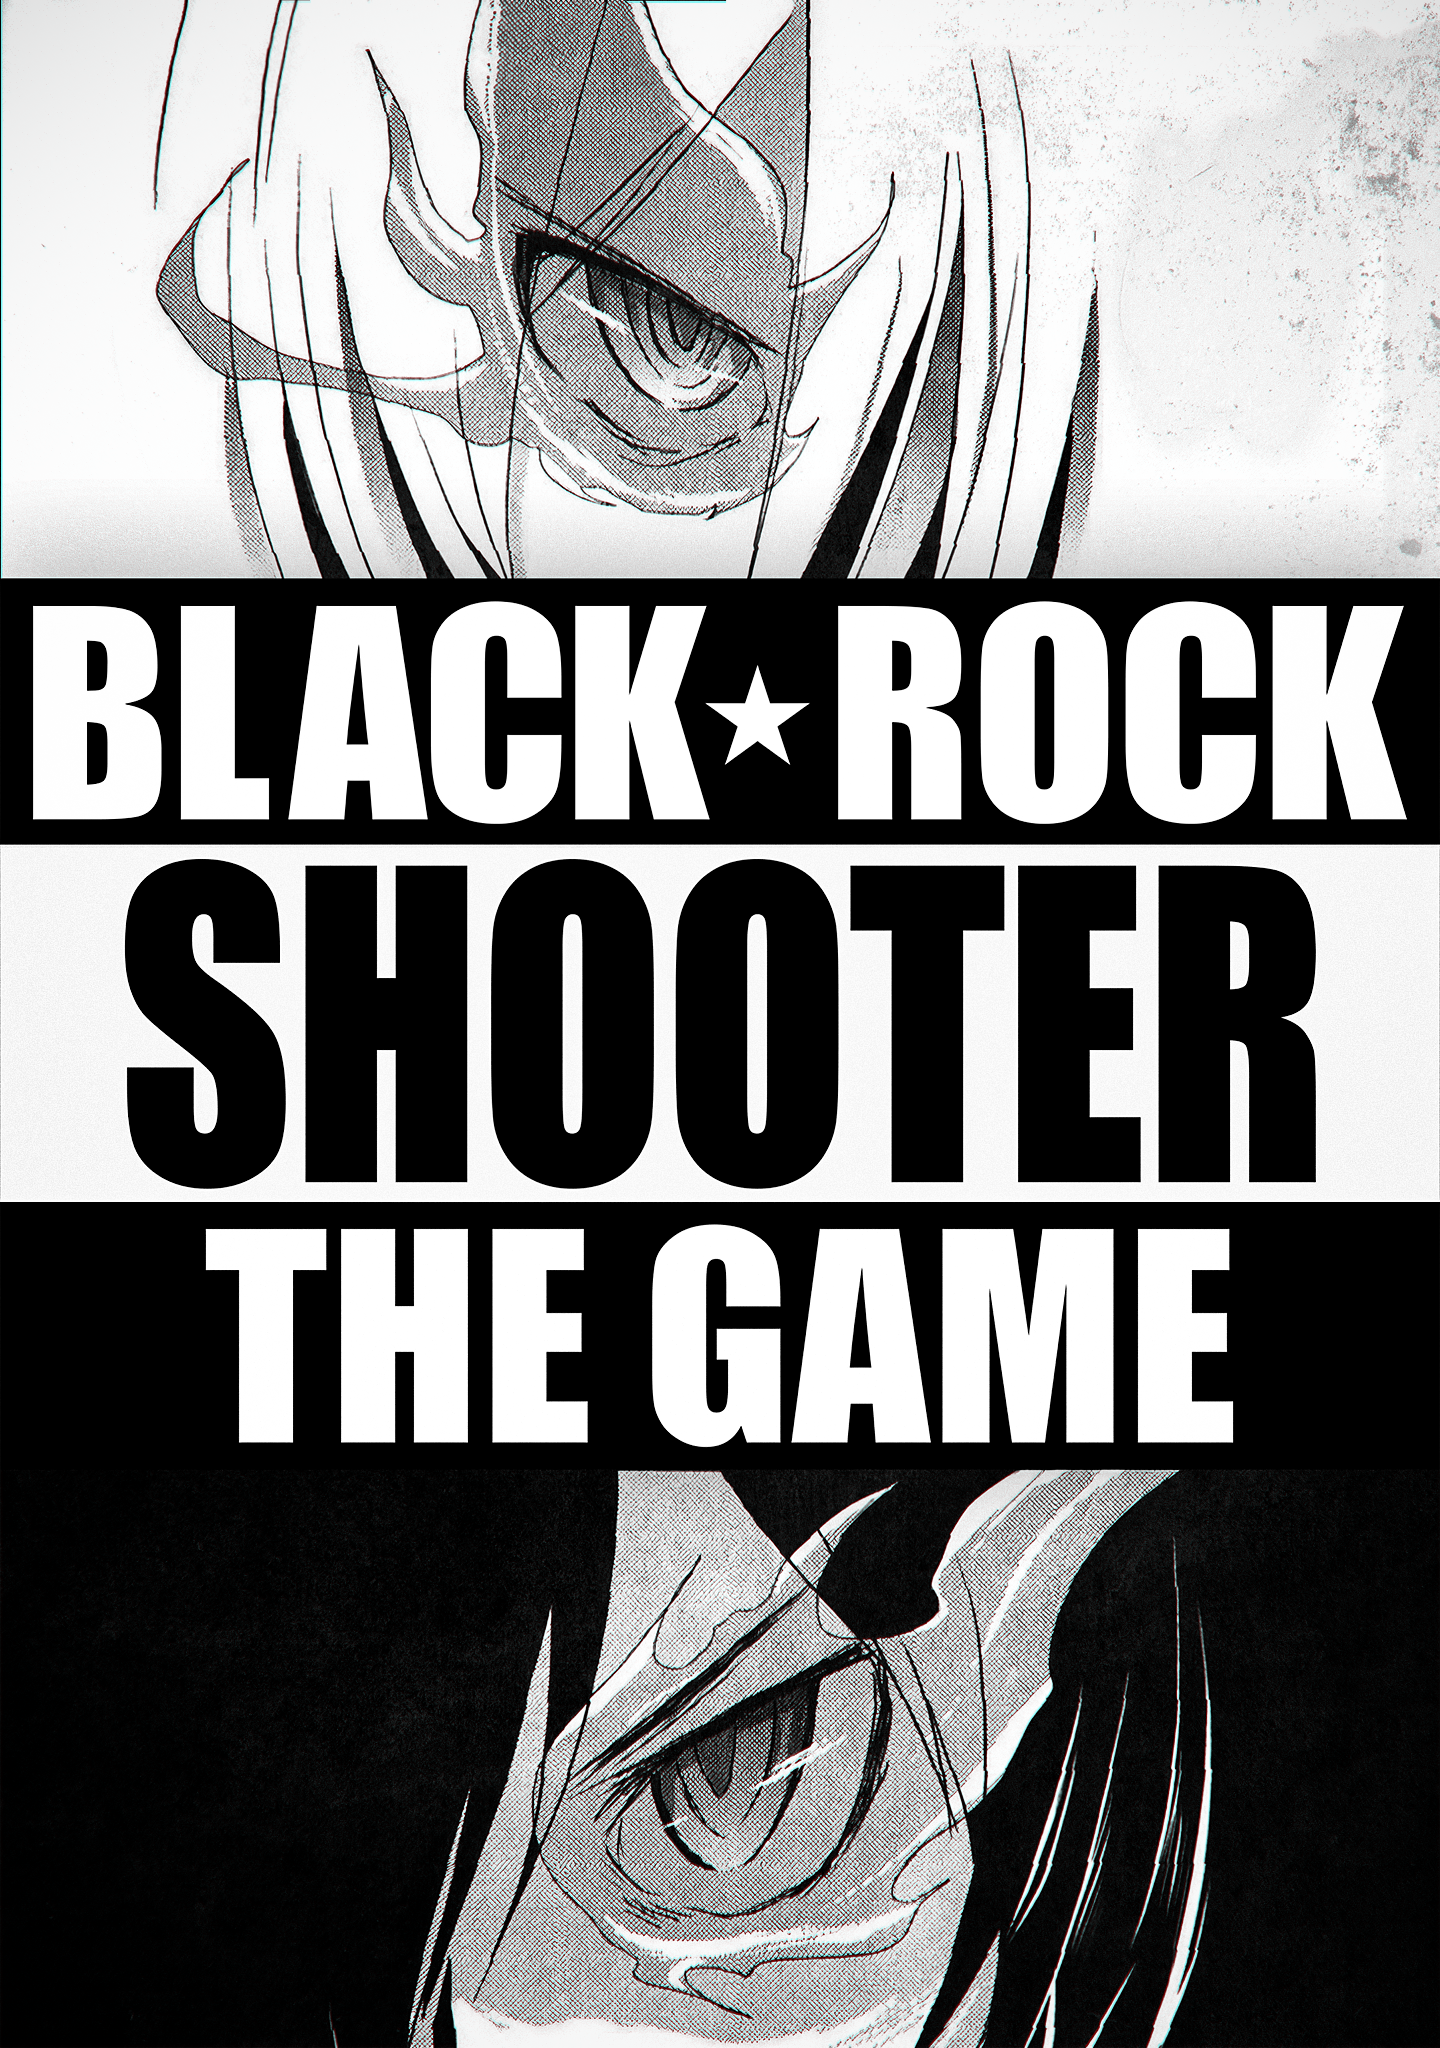 Black Rock Shooter THE GAME Chapter 14 Panel Poster Edit by ArthurLopes